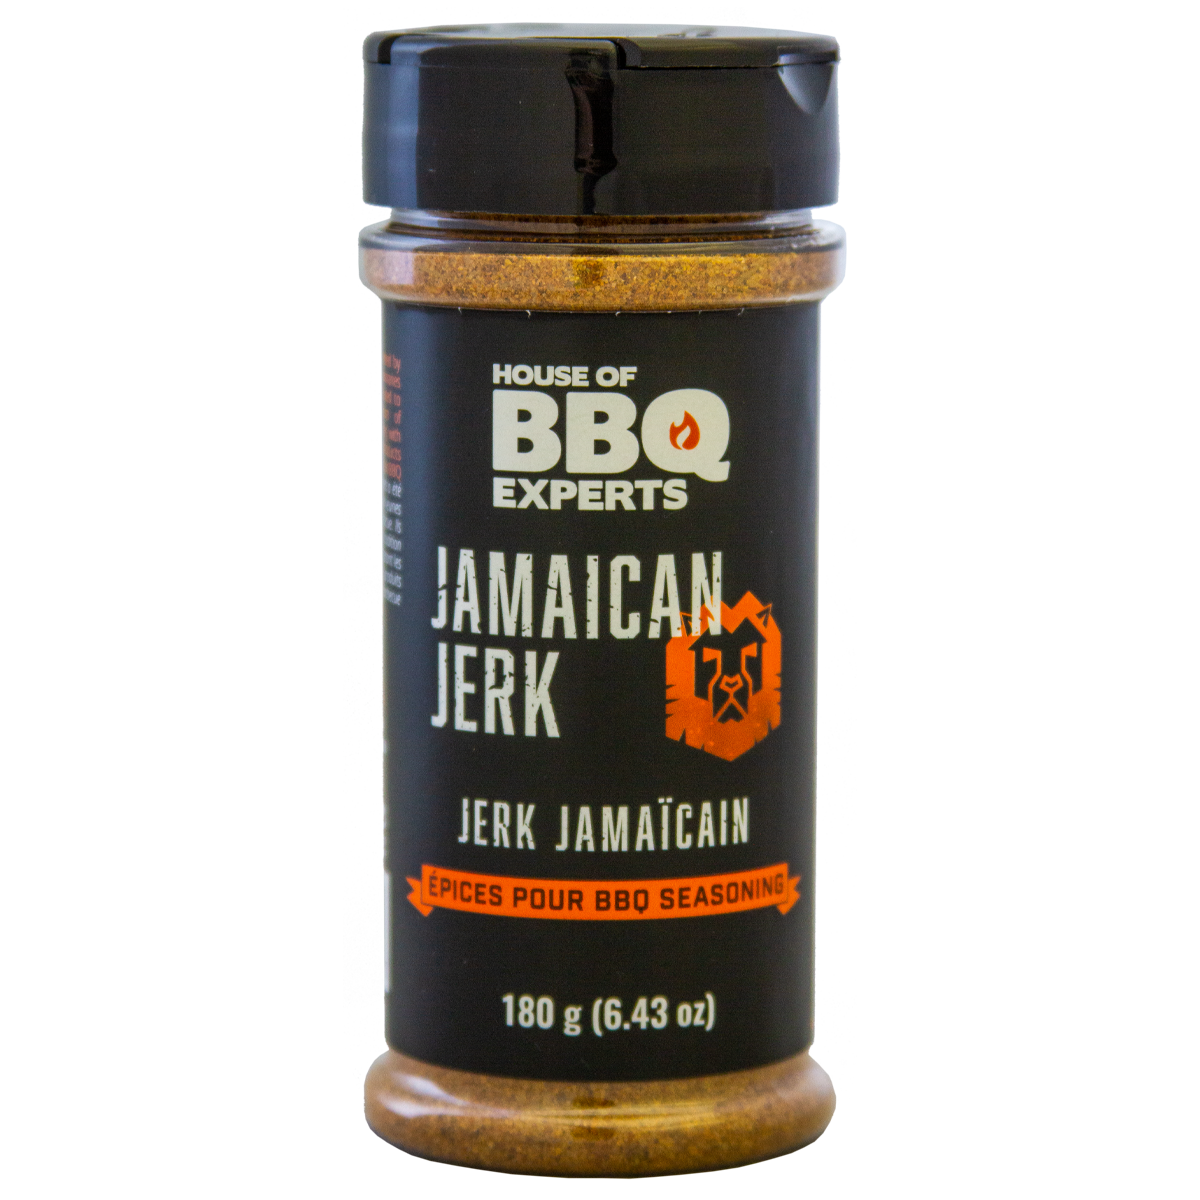 House of BBQ Experts Jamaican Jerk Spice Mix and Rub 180g (6.43 oz)